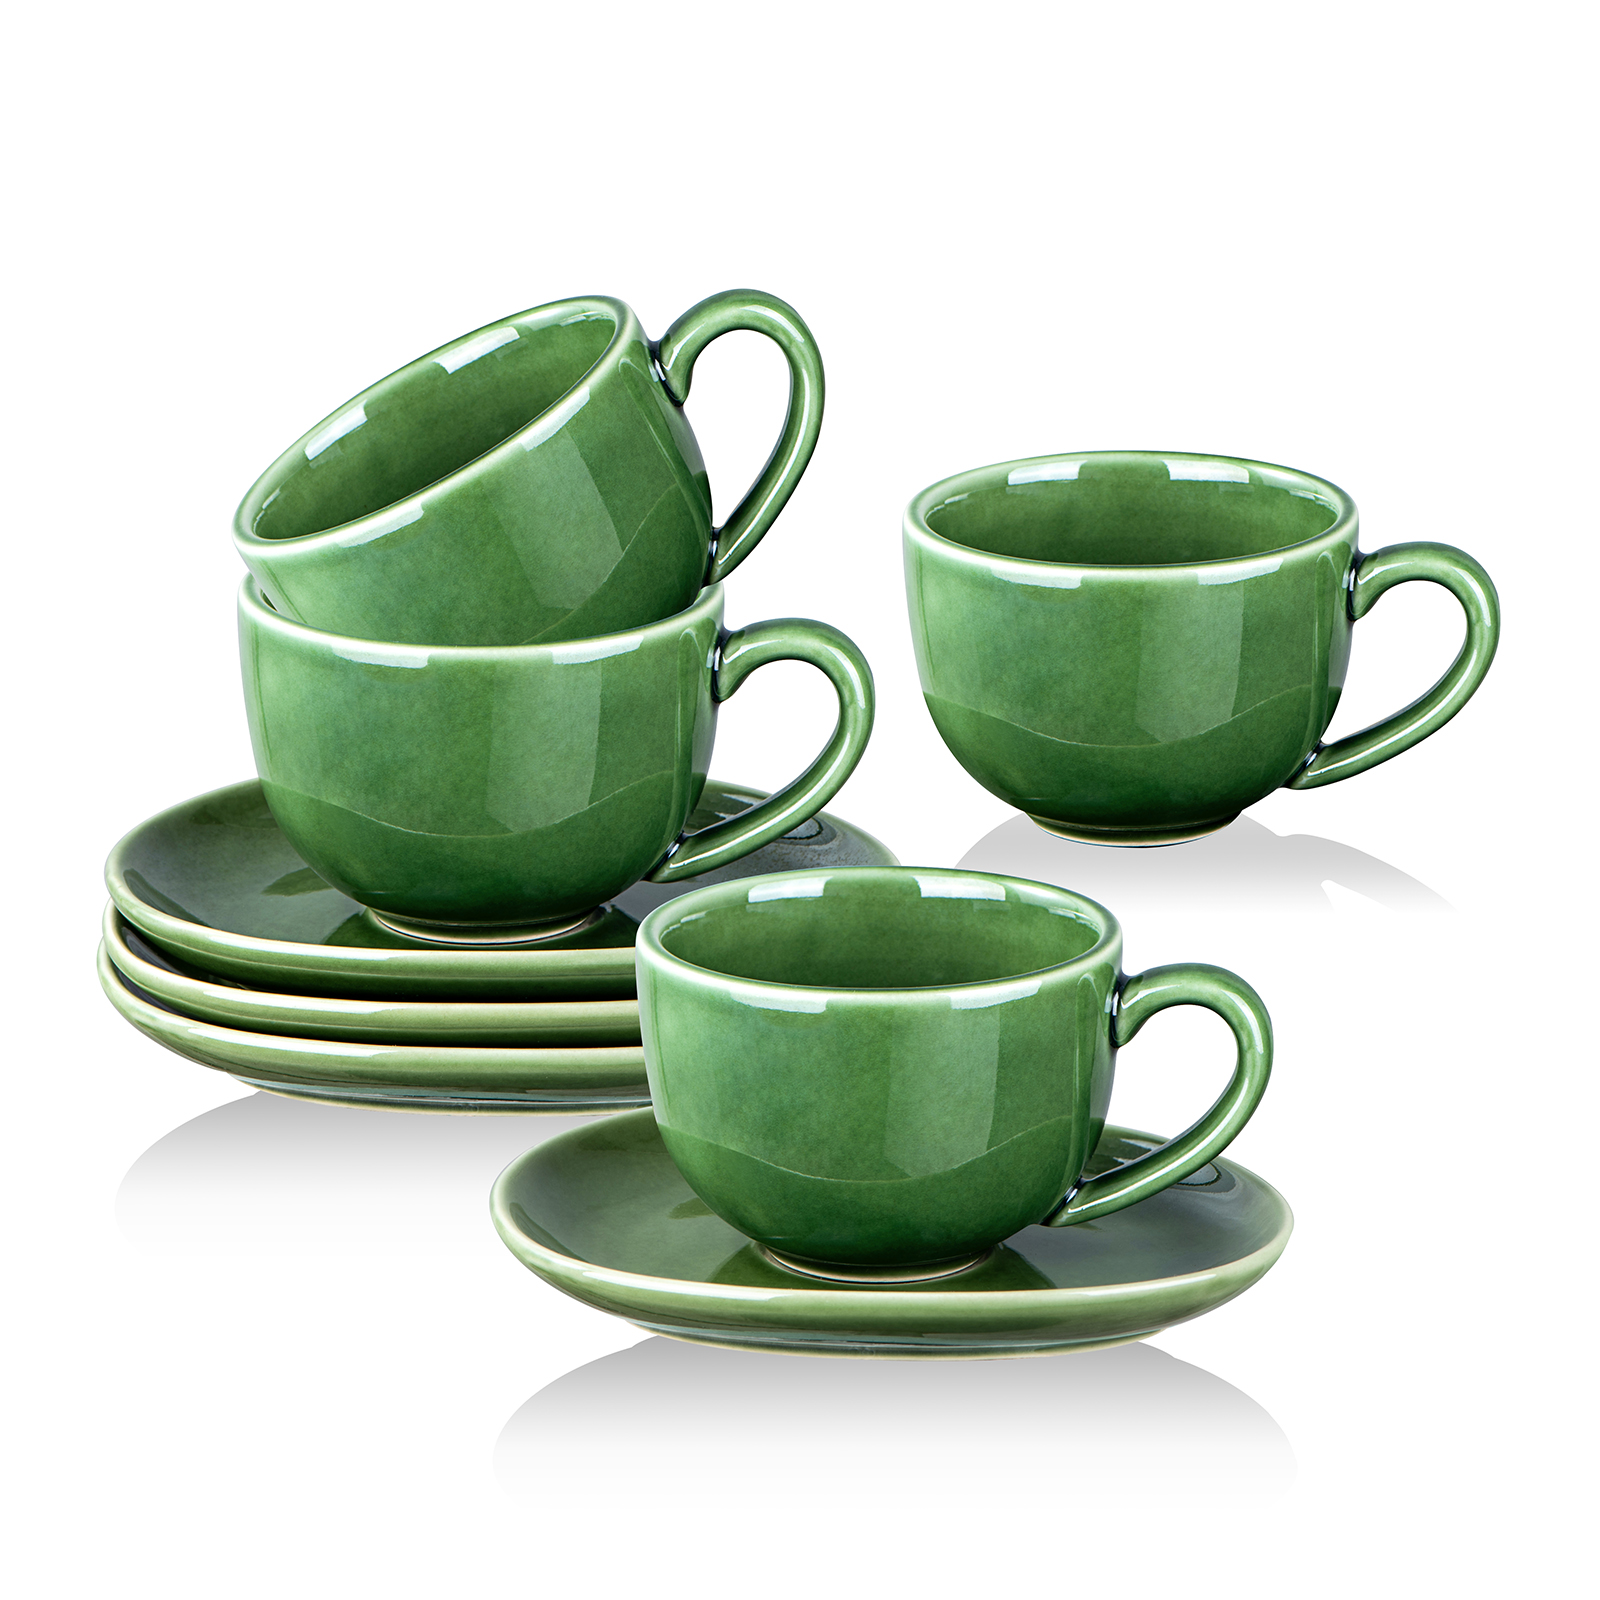 VICRAYS 6.5 oz Cappuccino Cups with Saucers, Set of 4, Ceramic Coffee Cup  for Au Lait, Double shot, Latte, Cafe Mocha, Tea (Green) - Vicrays Ceramics